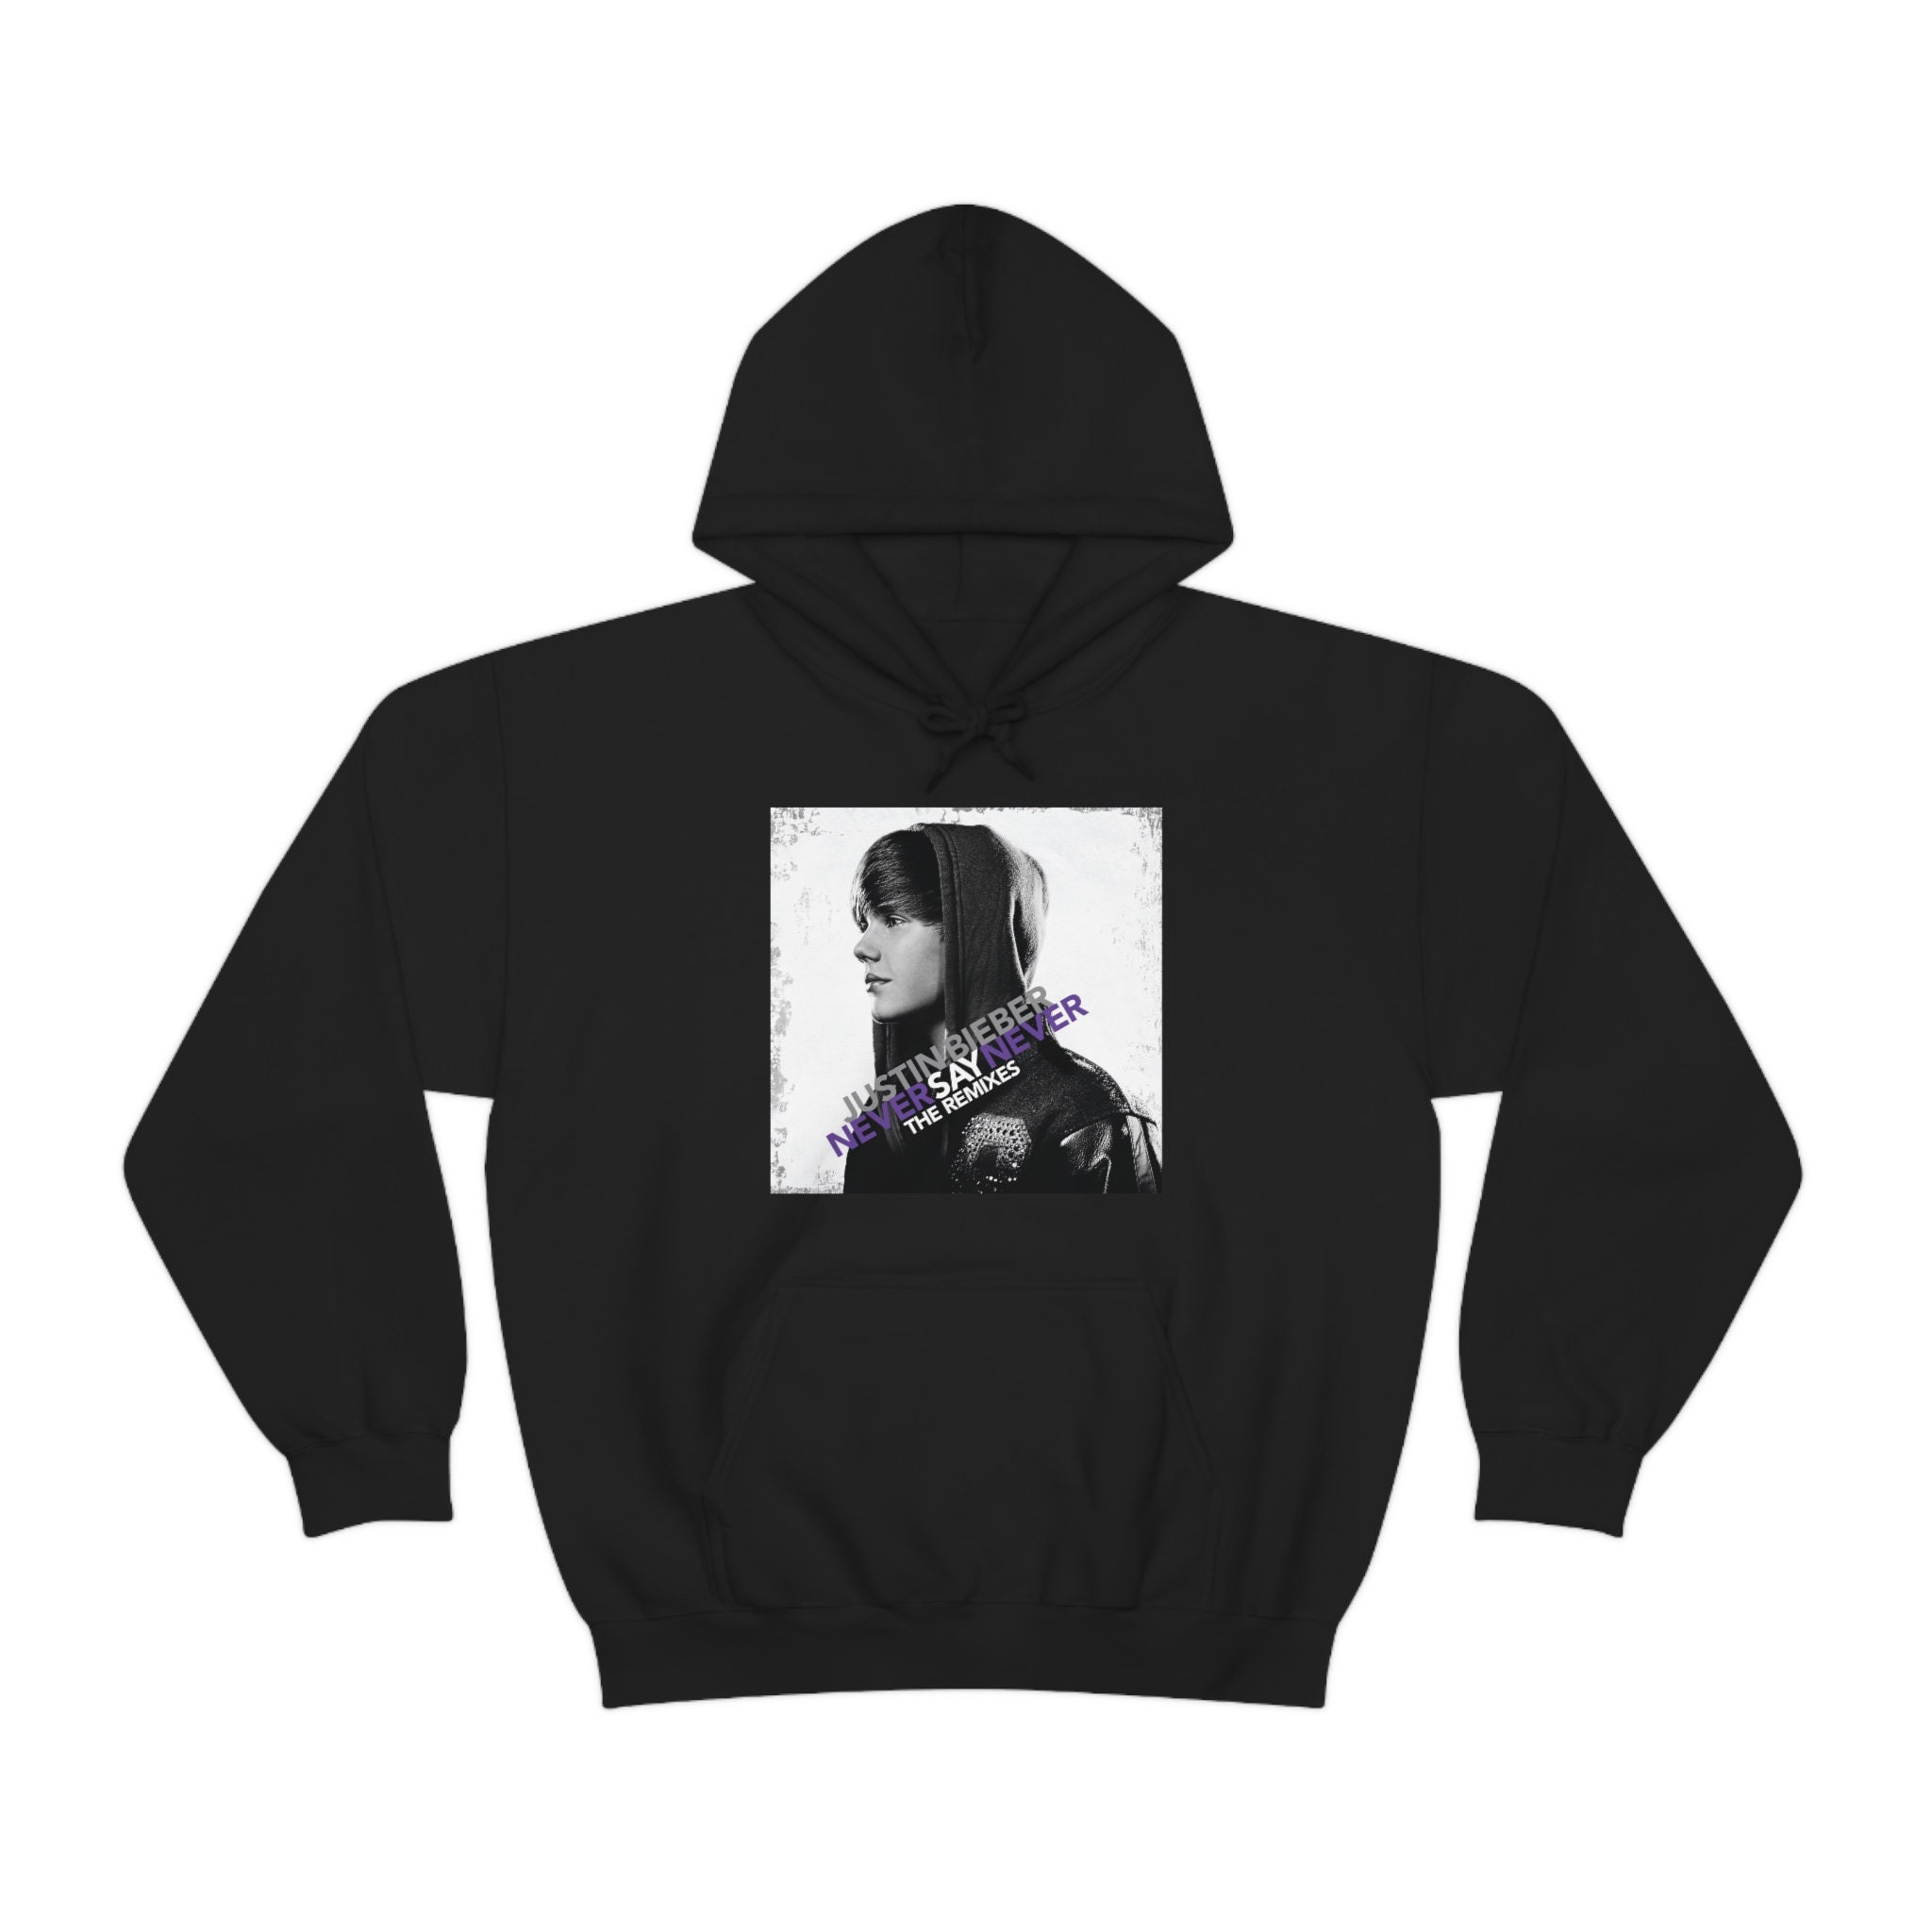 Discover Justin Bieber - Never Say Never Hoodie